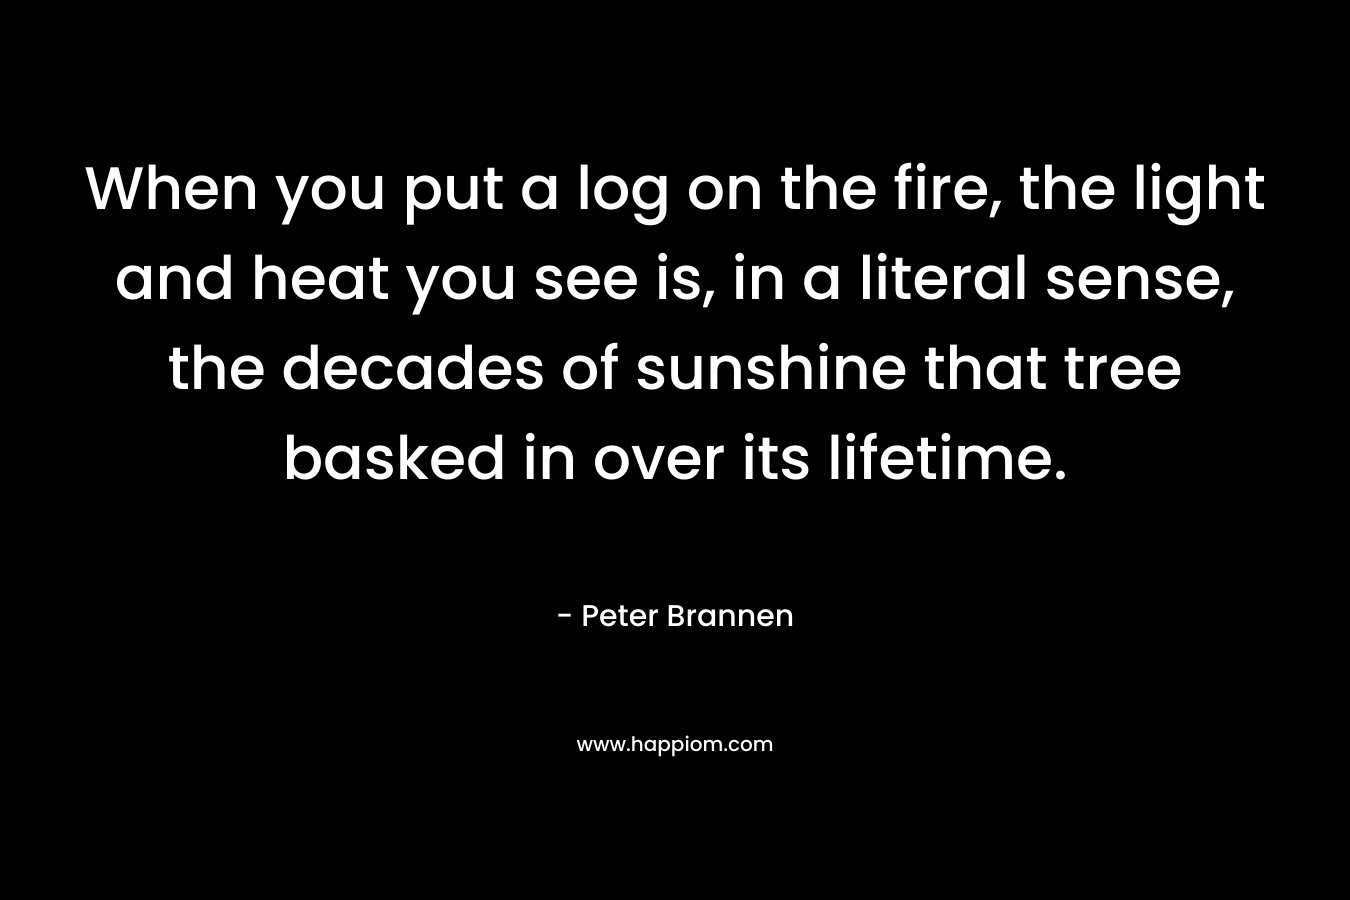 When you put a log on the fire, the light and heat you see is, in a literal sense, the decades of sunshine that tree basked in over its lifetime. – Peter Brannen